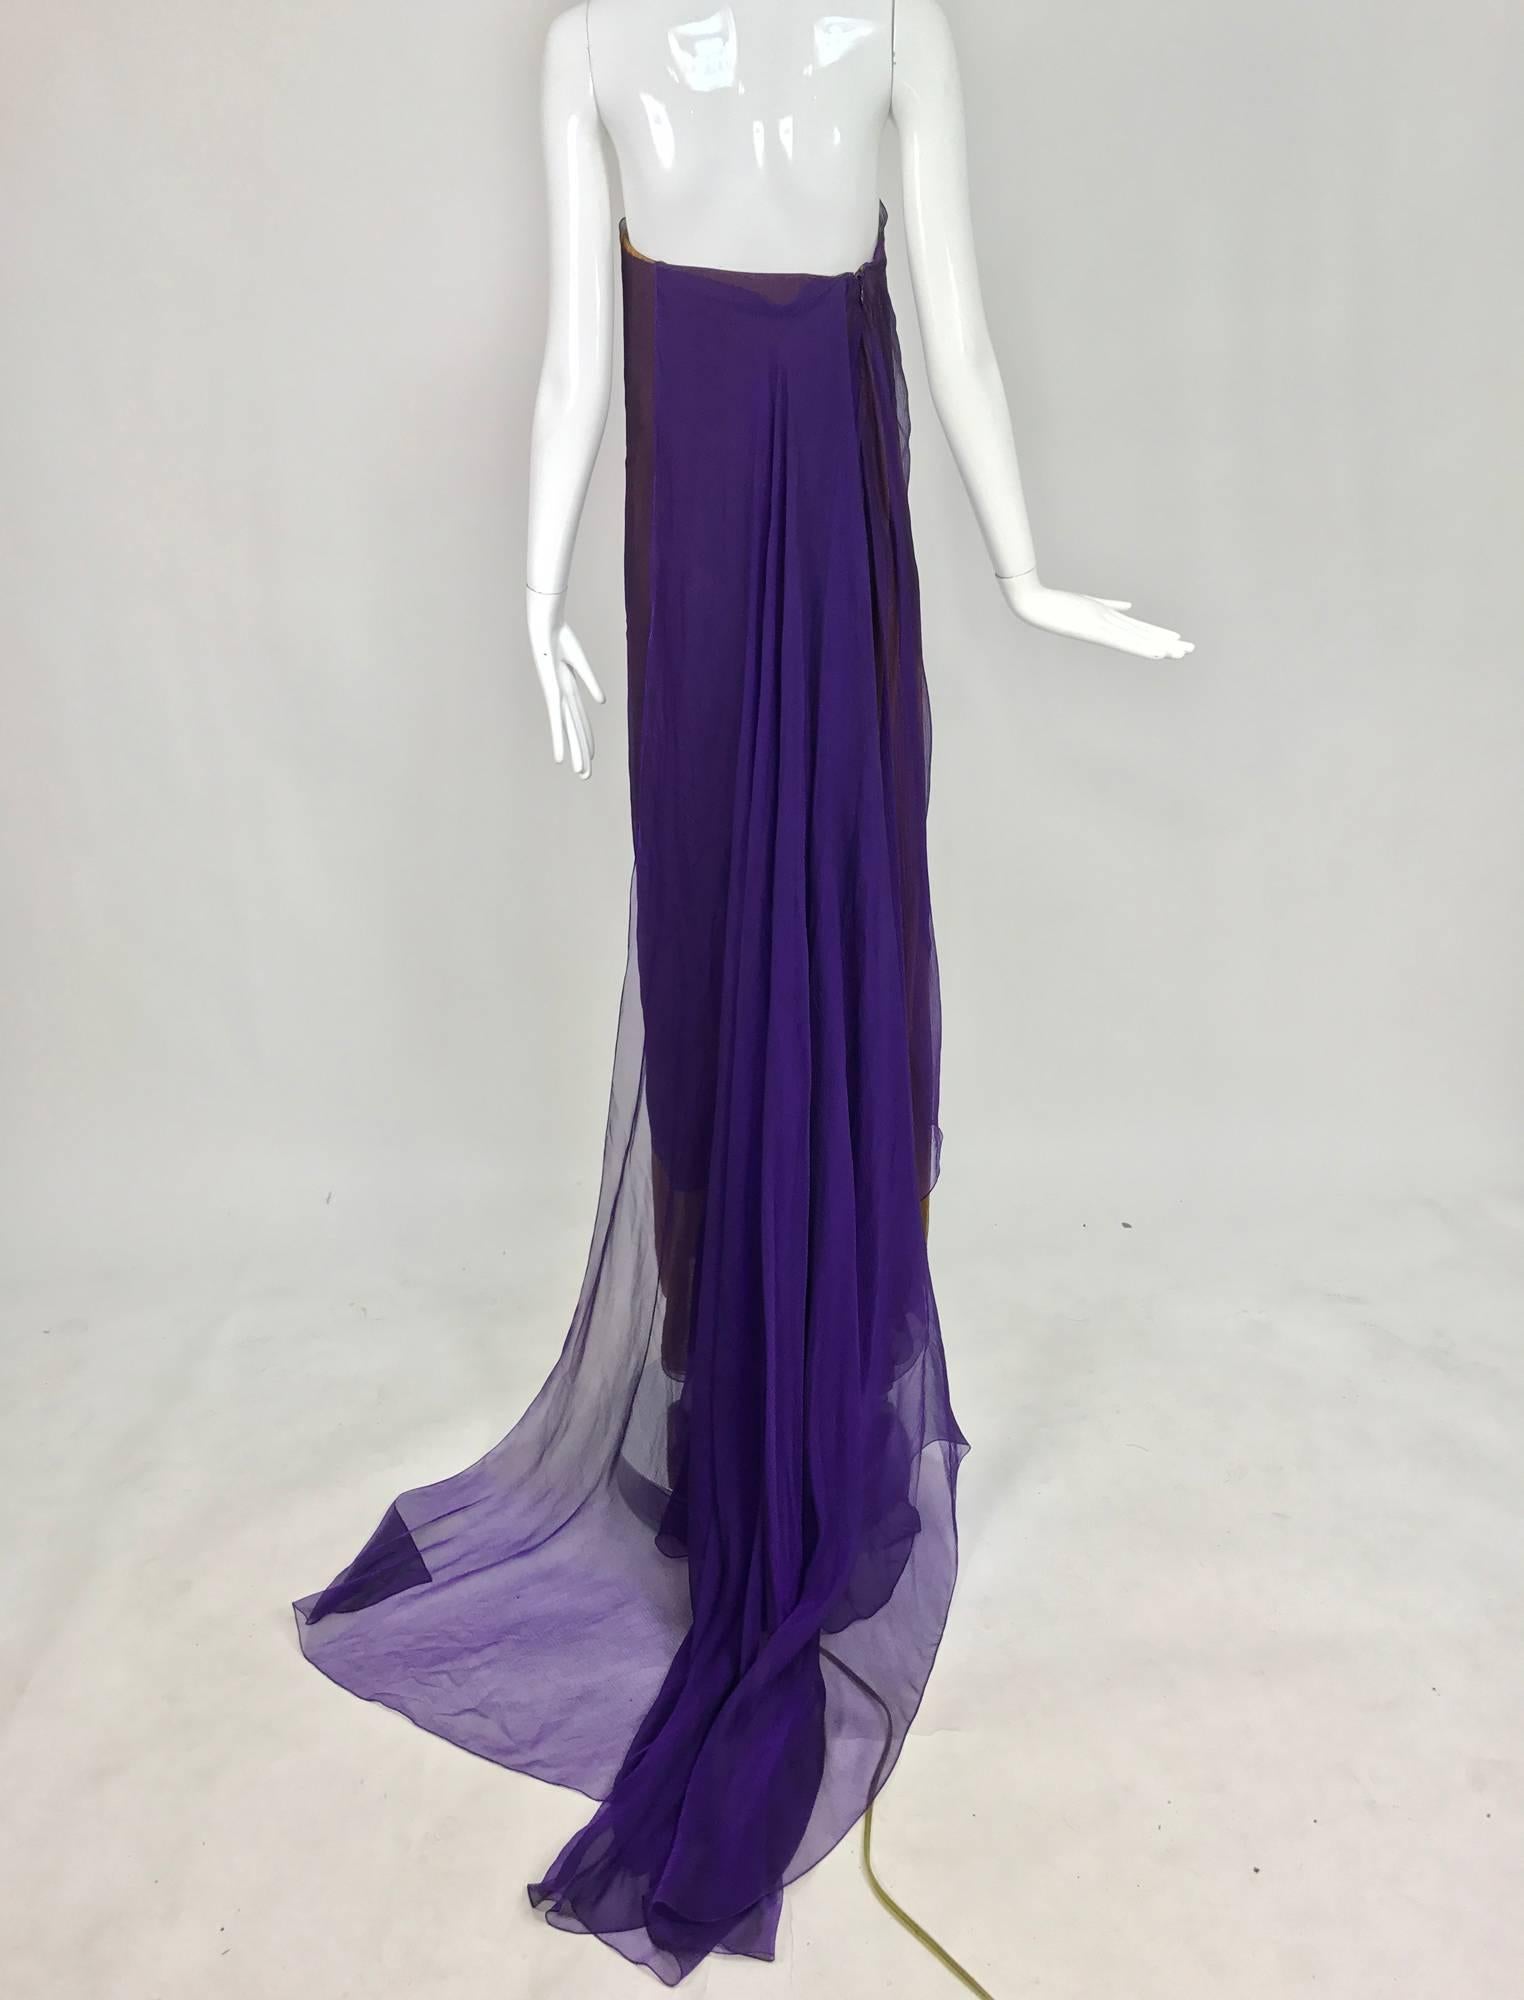 Chado Ralph Rucci Layered Iridescent Silk Chiffon Strapless Gown  In Excellent Condition For Sale In West Palm Beach, FL